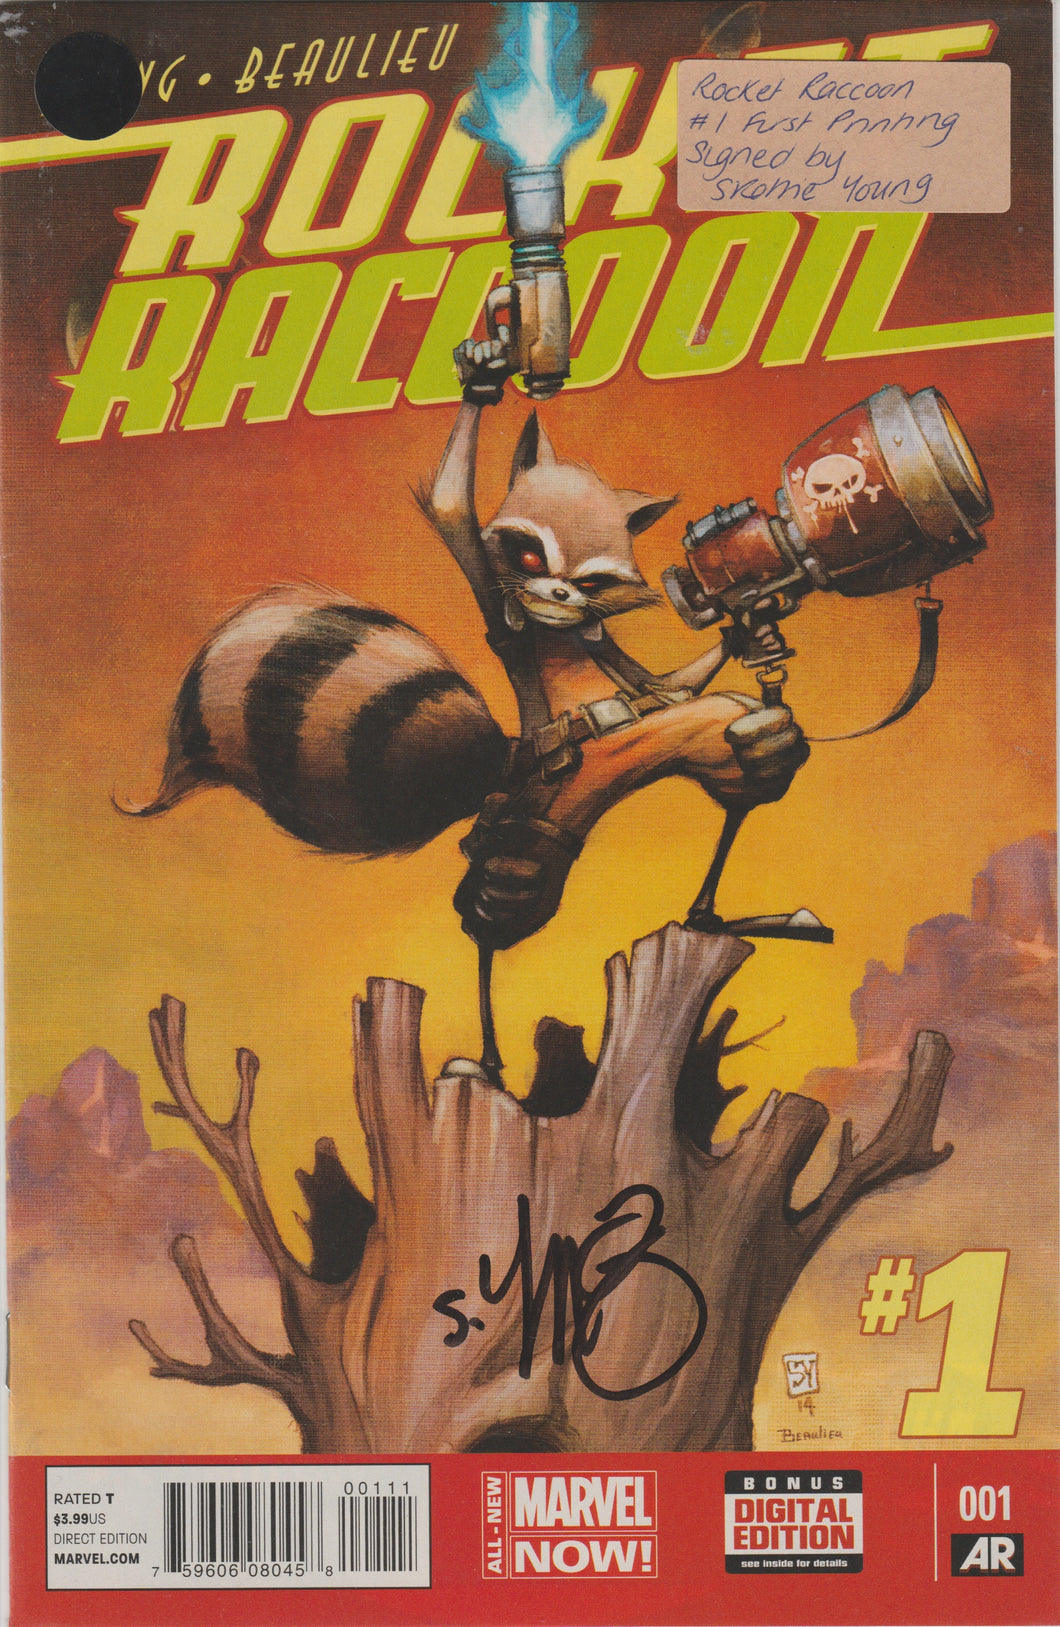 Rocket Raccoon 1 (First printing) signed by Skottie Young